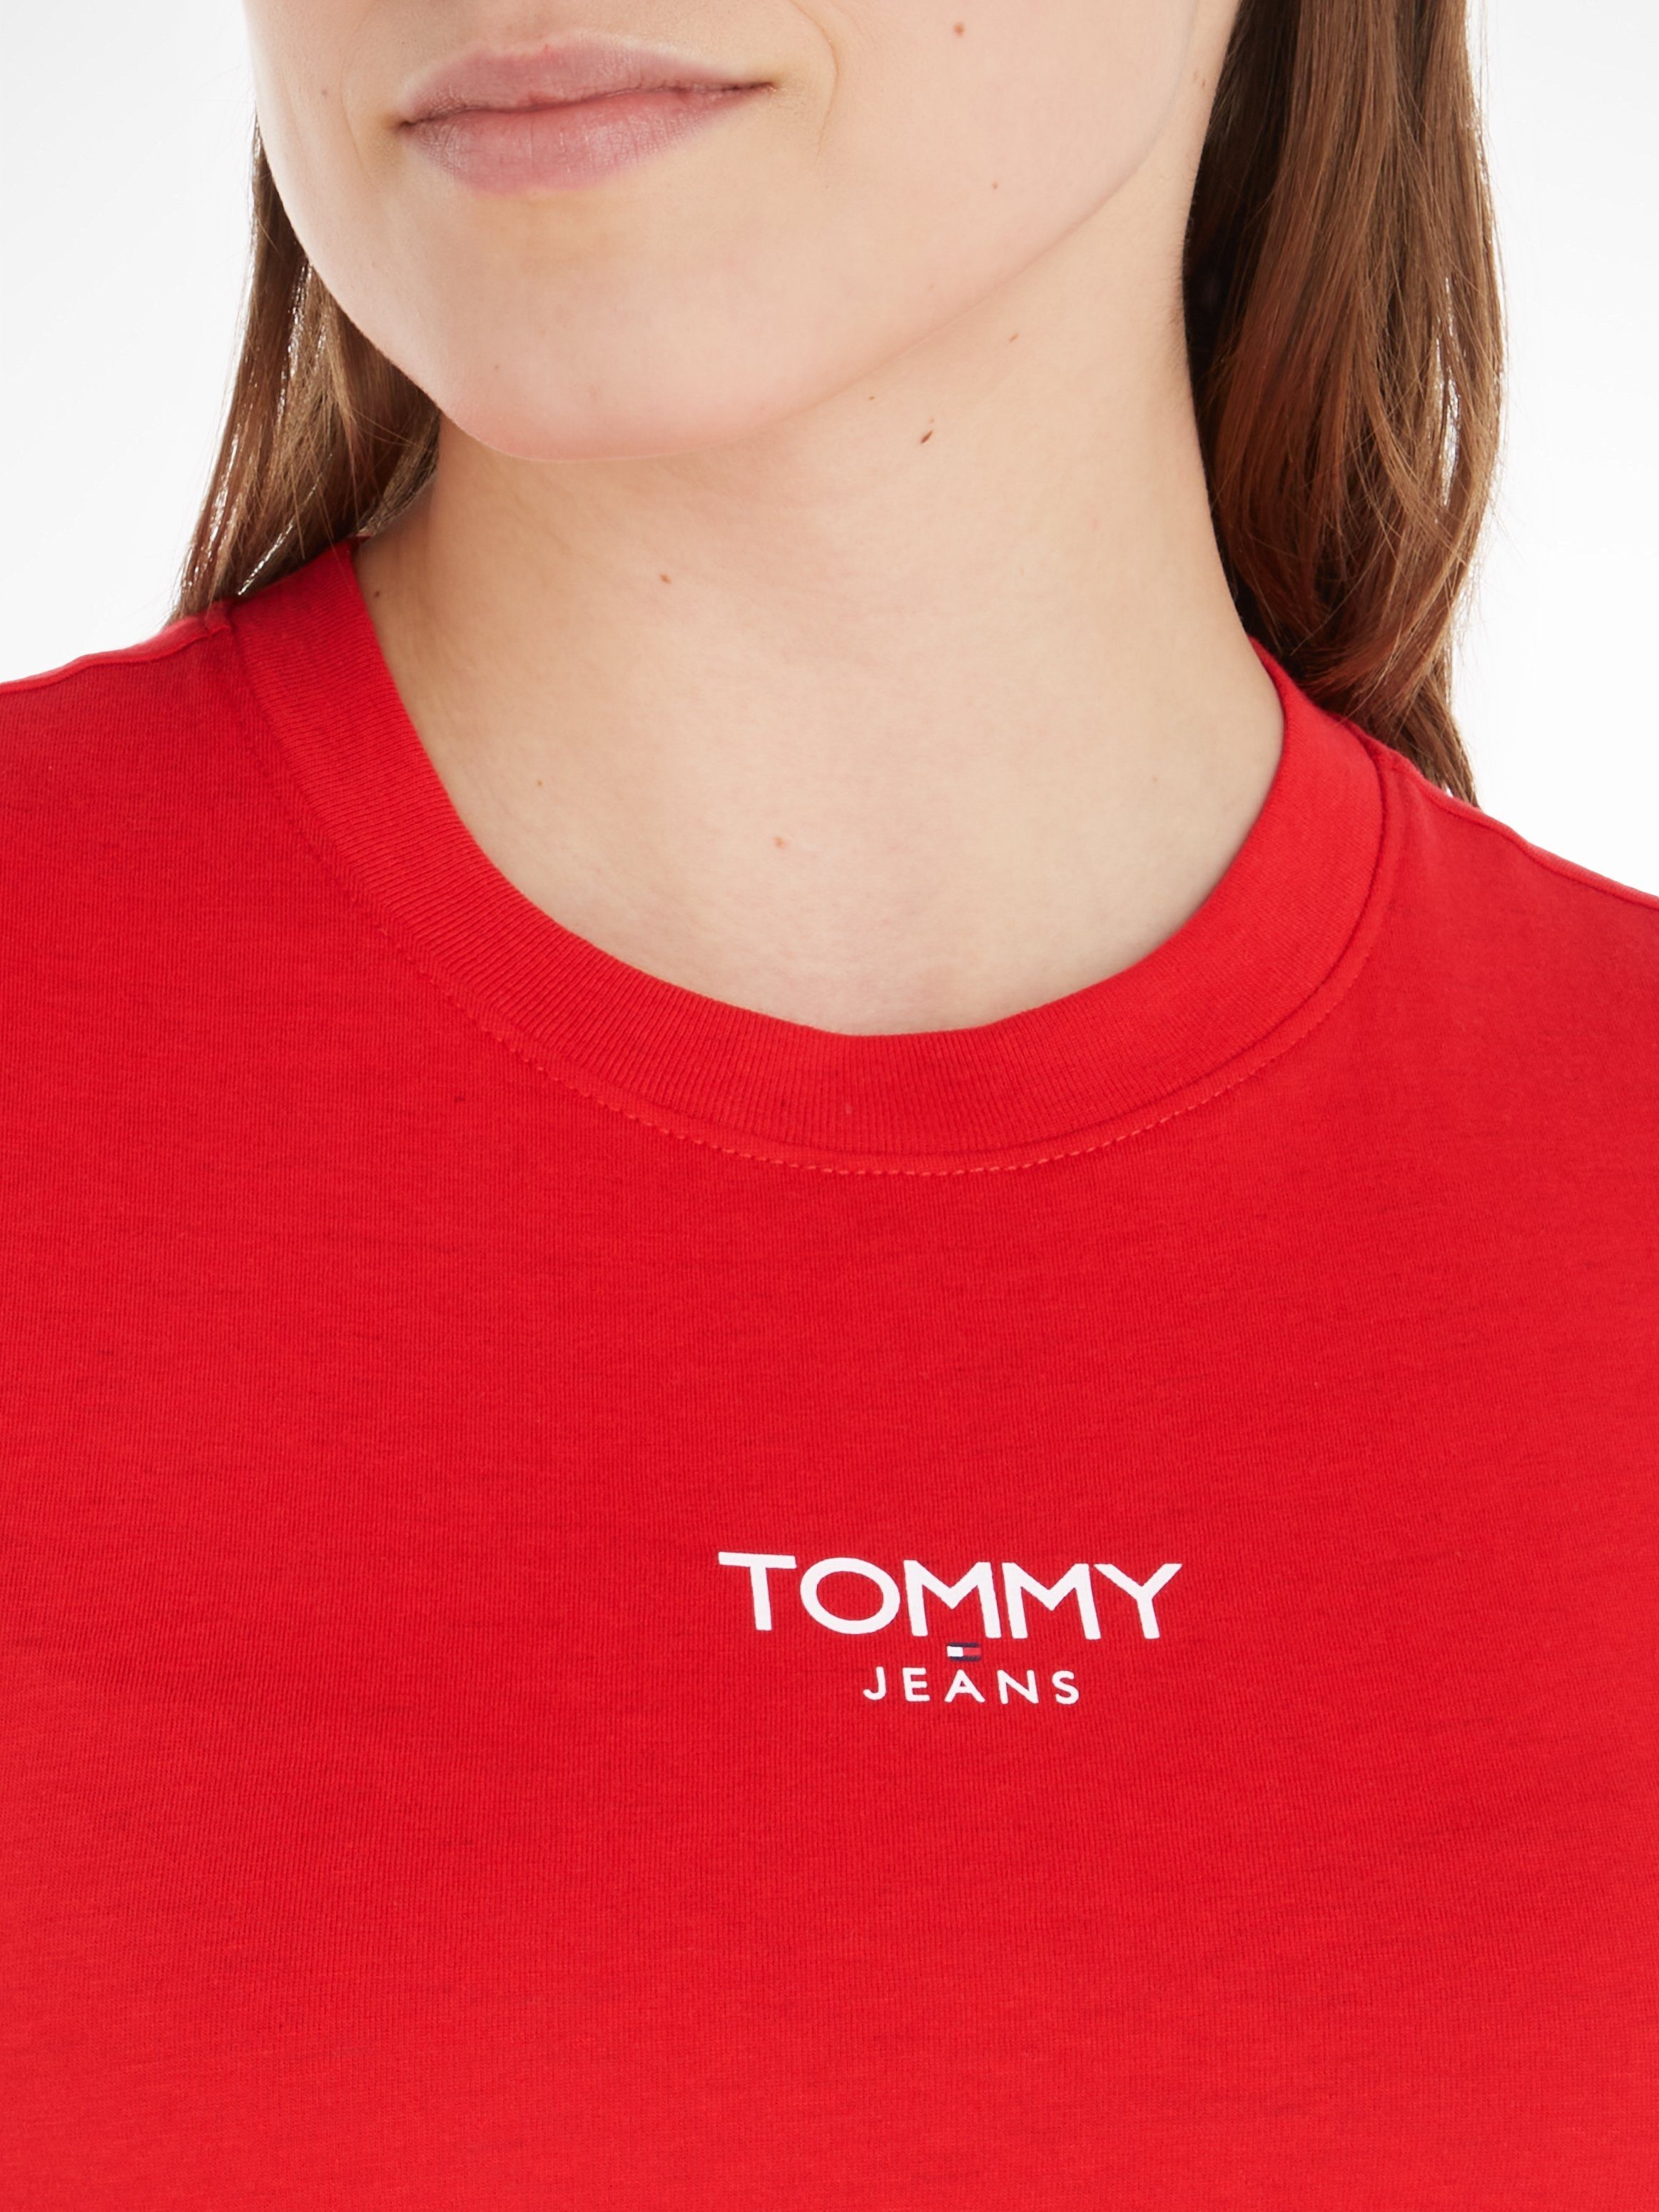 Jeans BBY Jeans TJW mit Tommy 1 SS Crimson Deep LOGO Logo T-Shirt ESSENTIAL Tommy